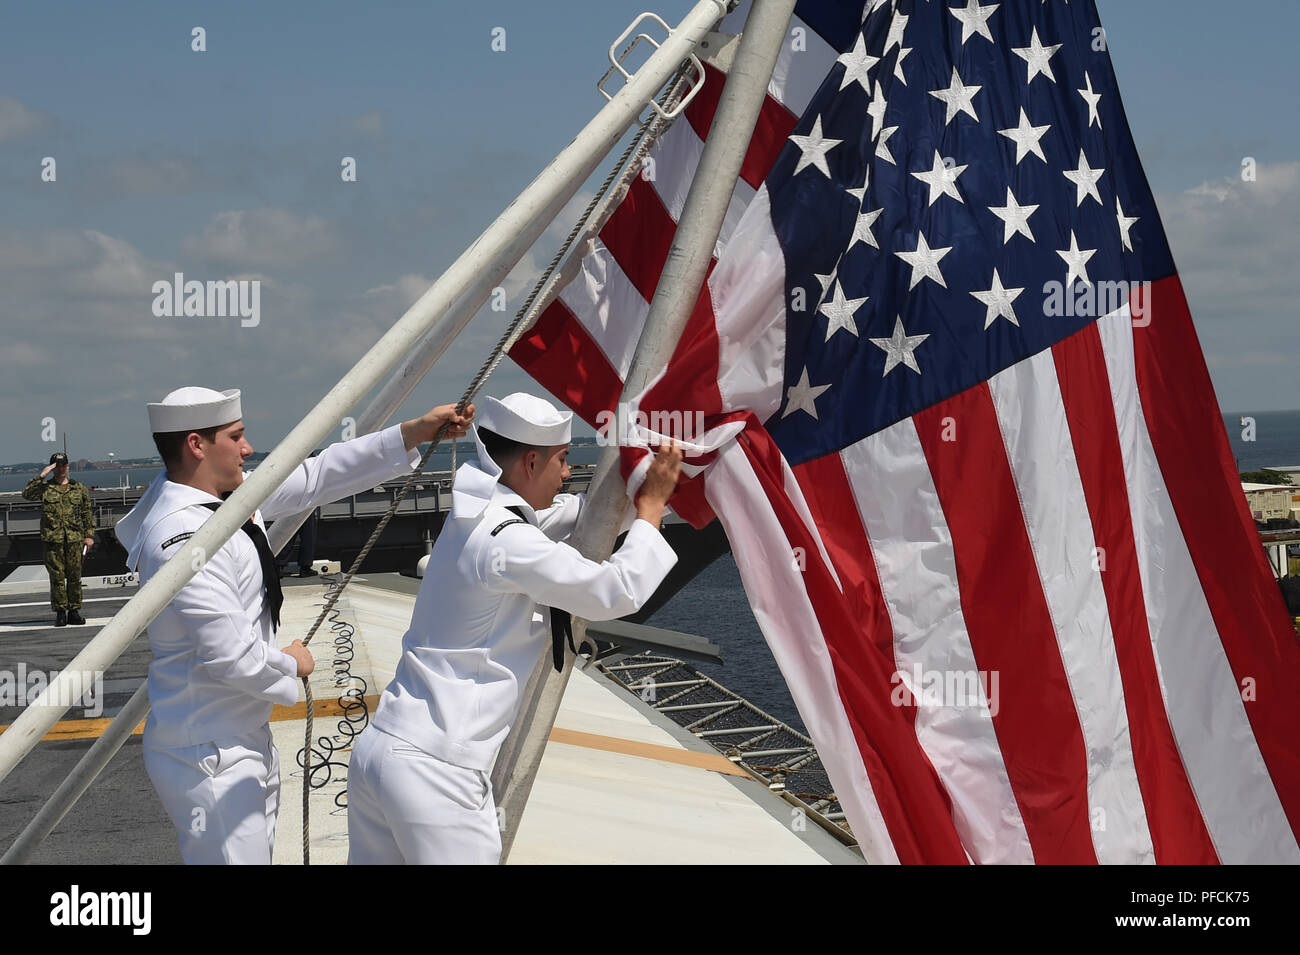 Norfolk, Va, USA. 19th Aug, 2018. NORFOLK (Aug. 19, 2018) Aviation Ordnanceman 3rd Class Joseph Rodriguez, right, and Aviation Ordnanceman Airman Kevin Pawlowski lower the national ensign on the flight deck of the Nimitz-class aircraft carrier USS Abraham Lincoln (CVN 72). Abraham Lincoln is currently underway conducting carrier qualifications in preparation for an upcoming deployment. (U.S. Navy photo by Mass Communication Specialist 2nd Class Mark Andrew Hays/Released) 180819-N-JX484-008 US Navy via globallookpress.com Credit: Us Navy/Russian Look/ZUMA Wire/Alamy Live News Stock Photo